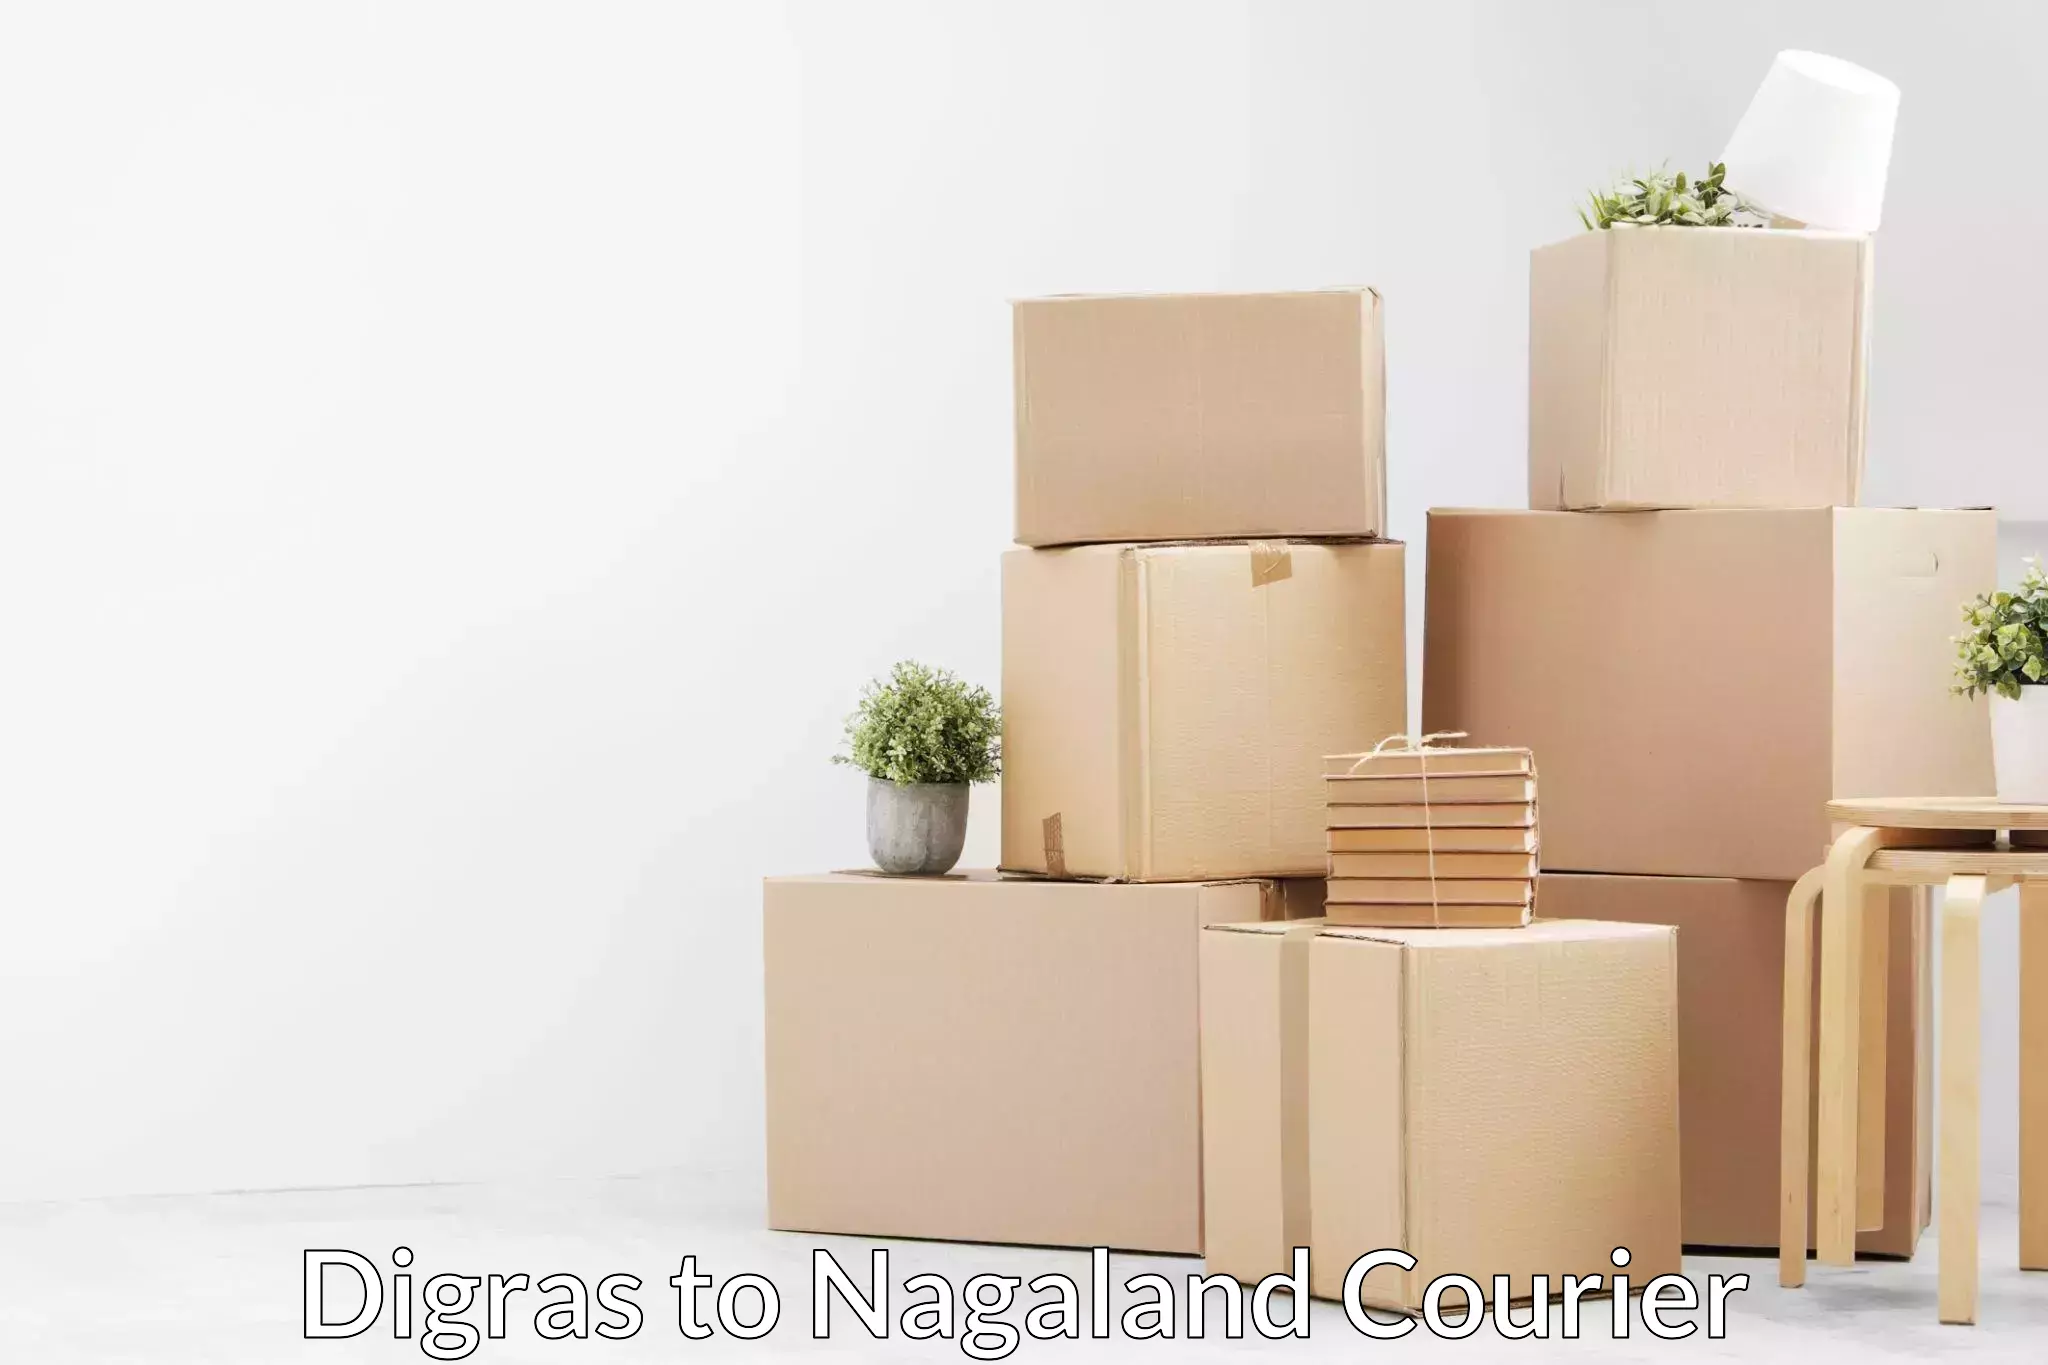 Efficient moving company Digras to Chumukedima